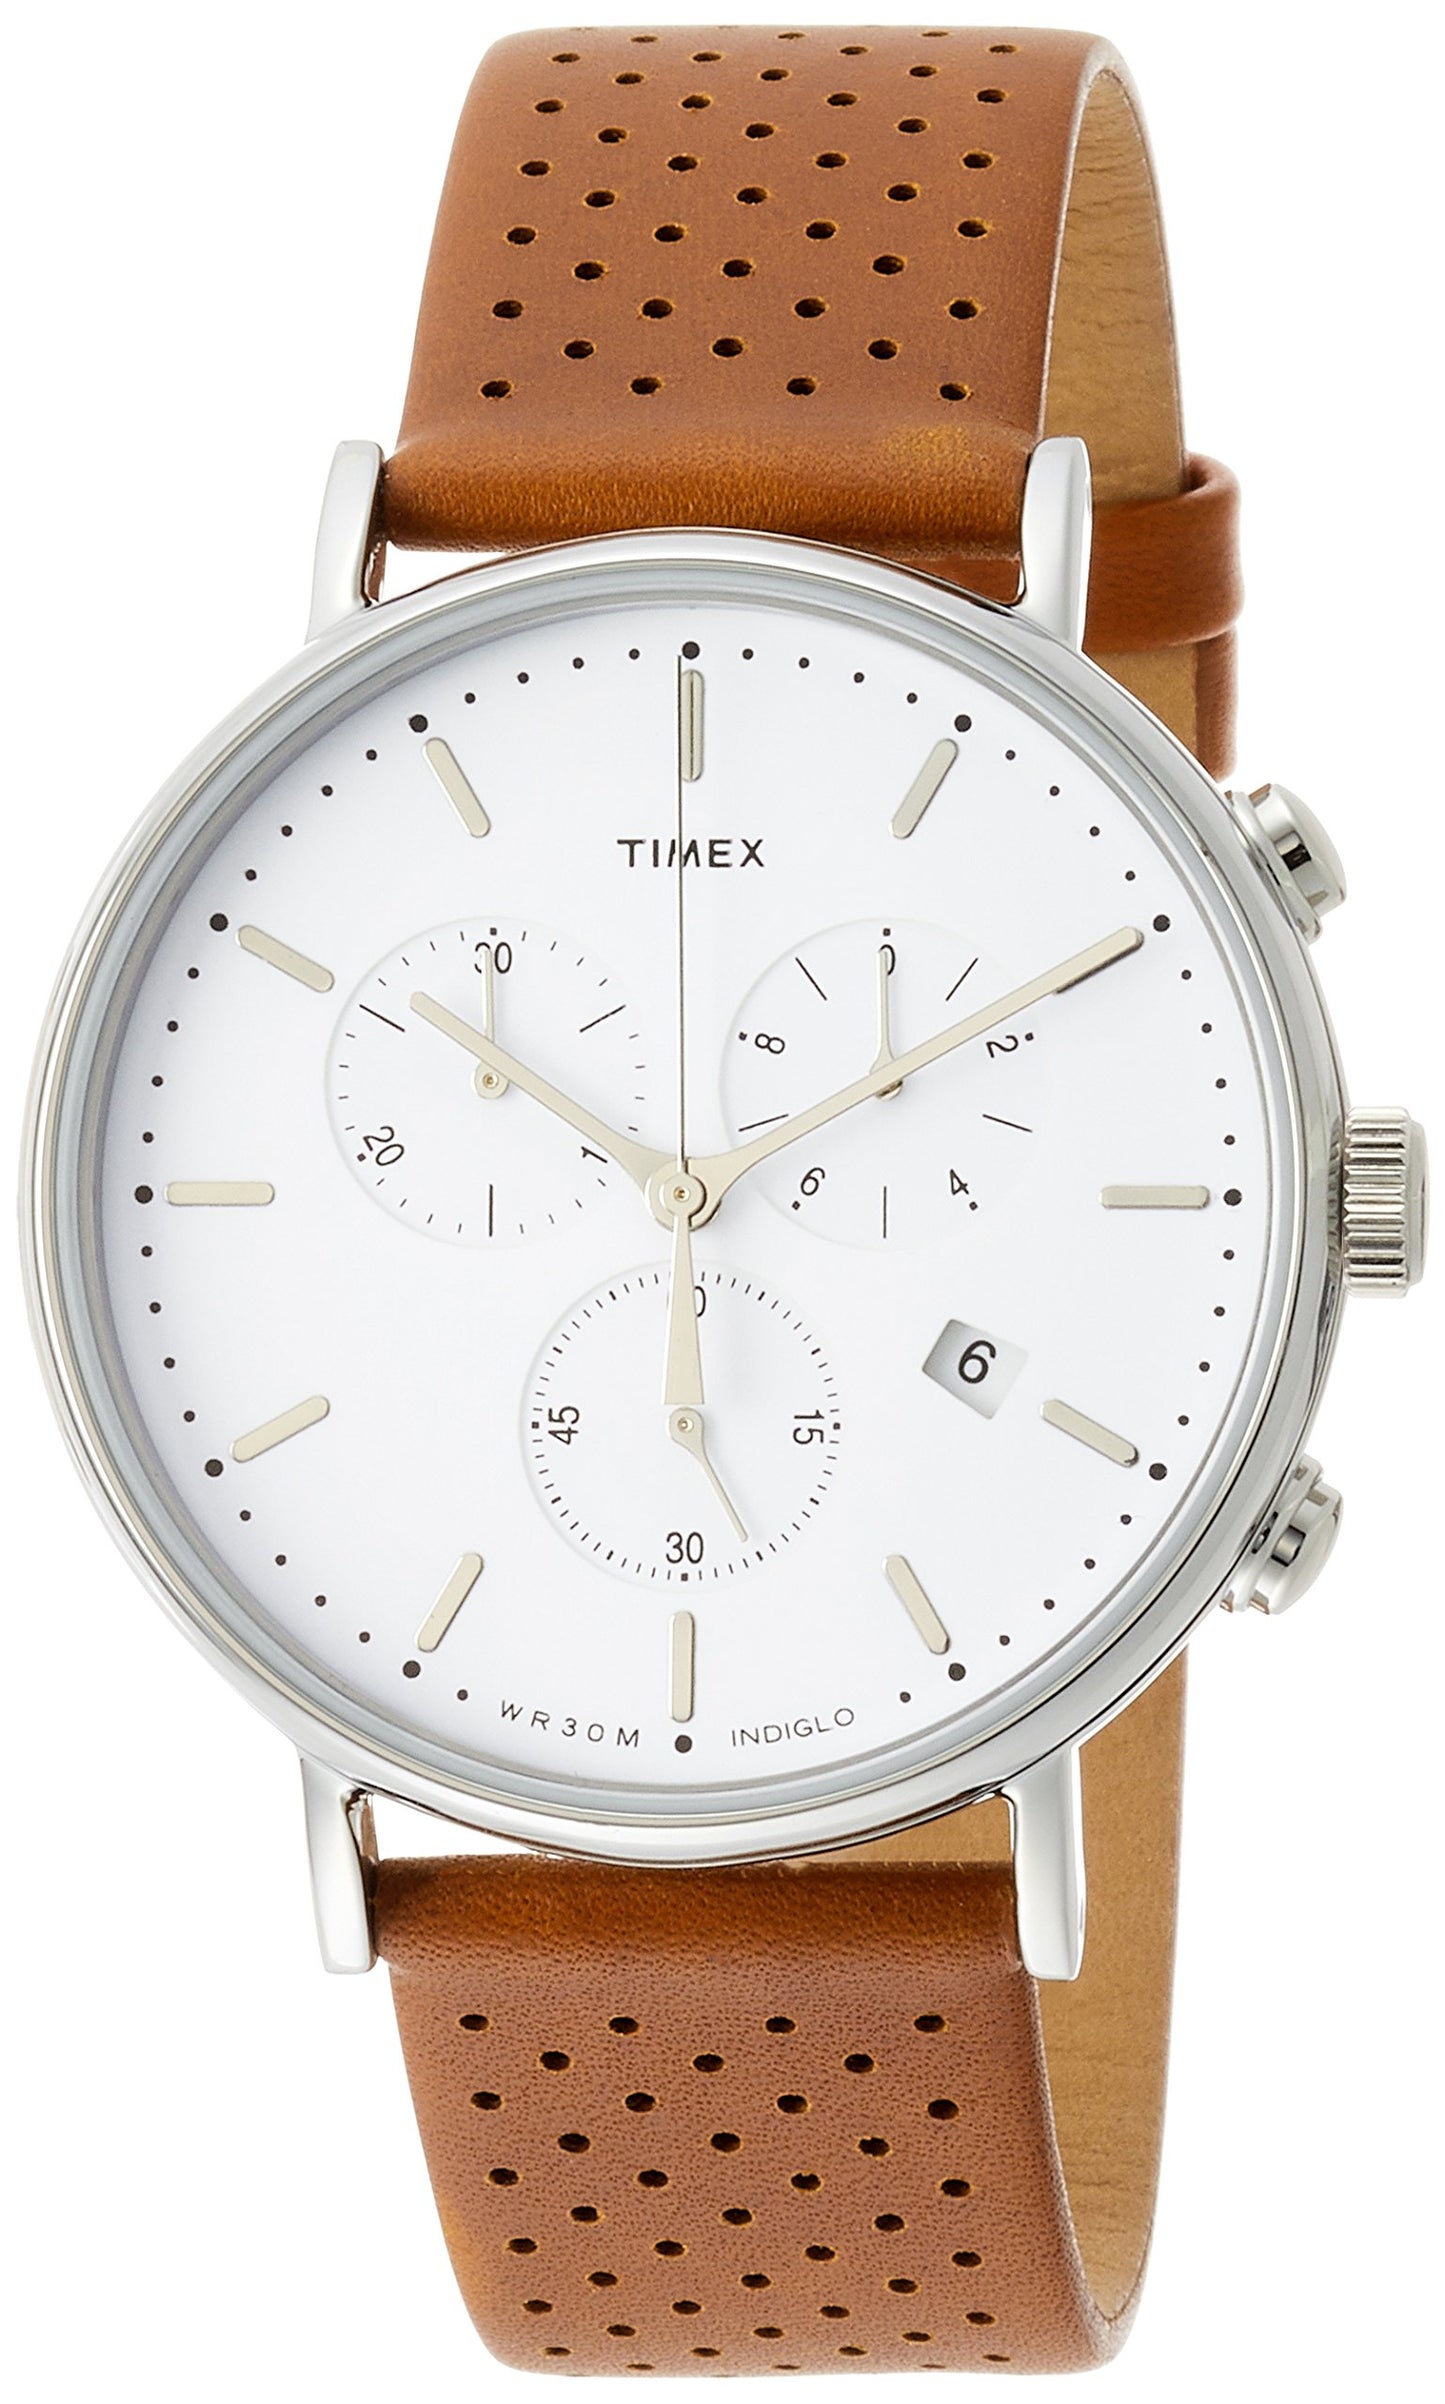 TIMEX Multifunctonal Men's Analog White Dial Coloured Quartz Watch, Round Dial with 41 mm Case Width - TW2R26700UJ